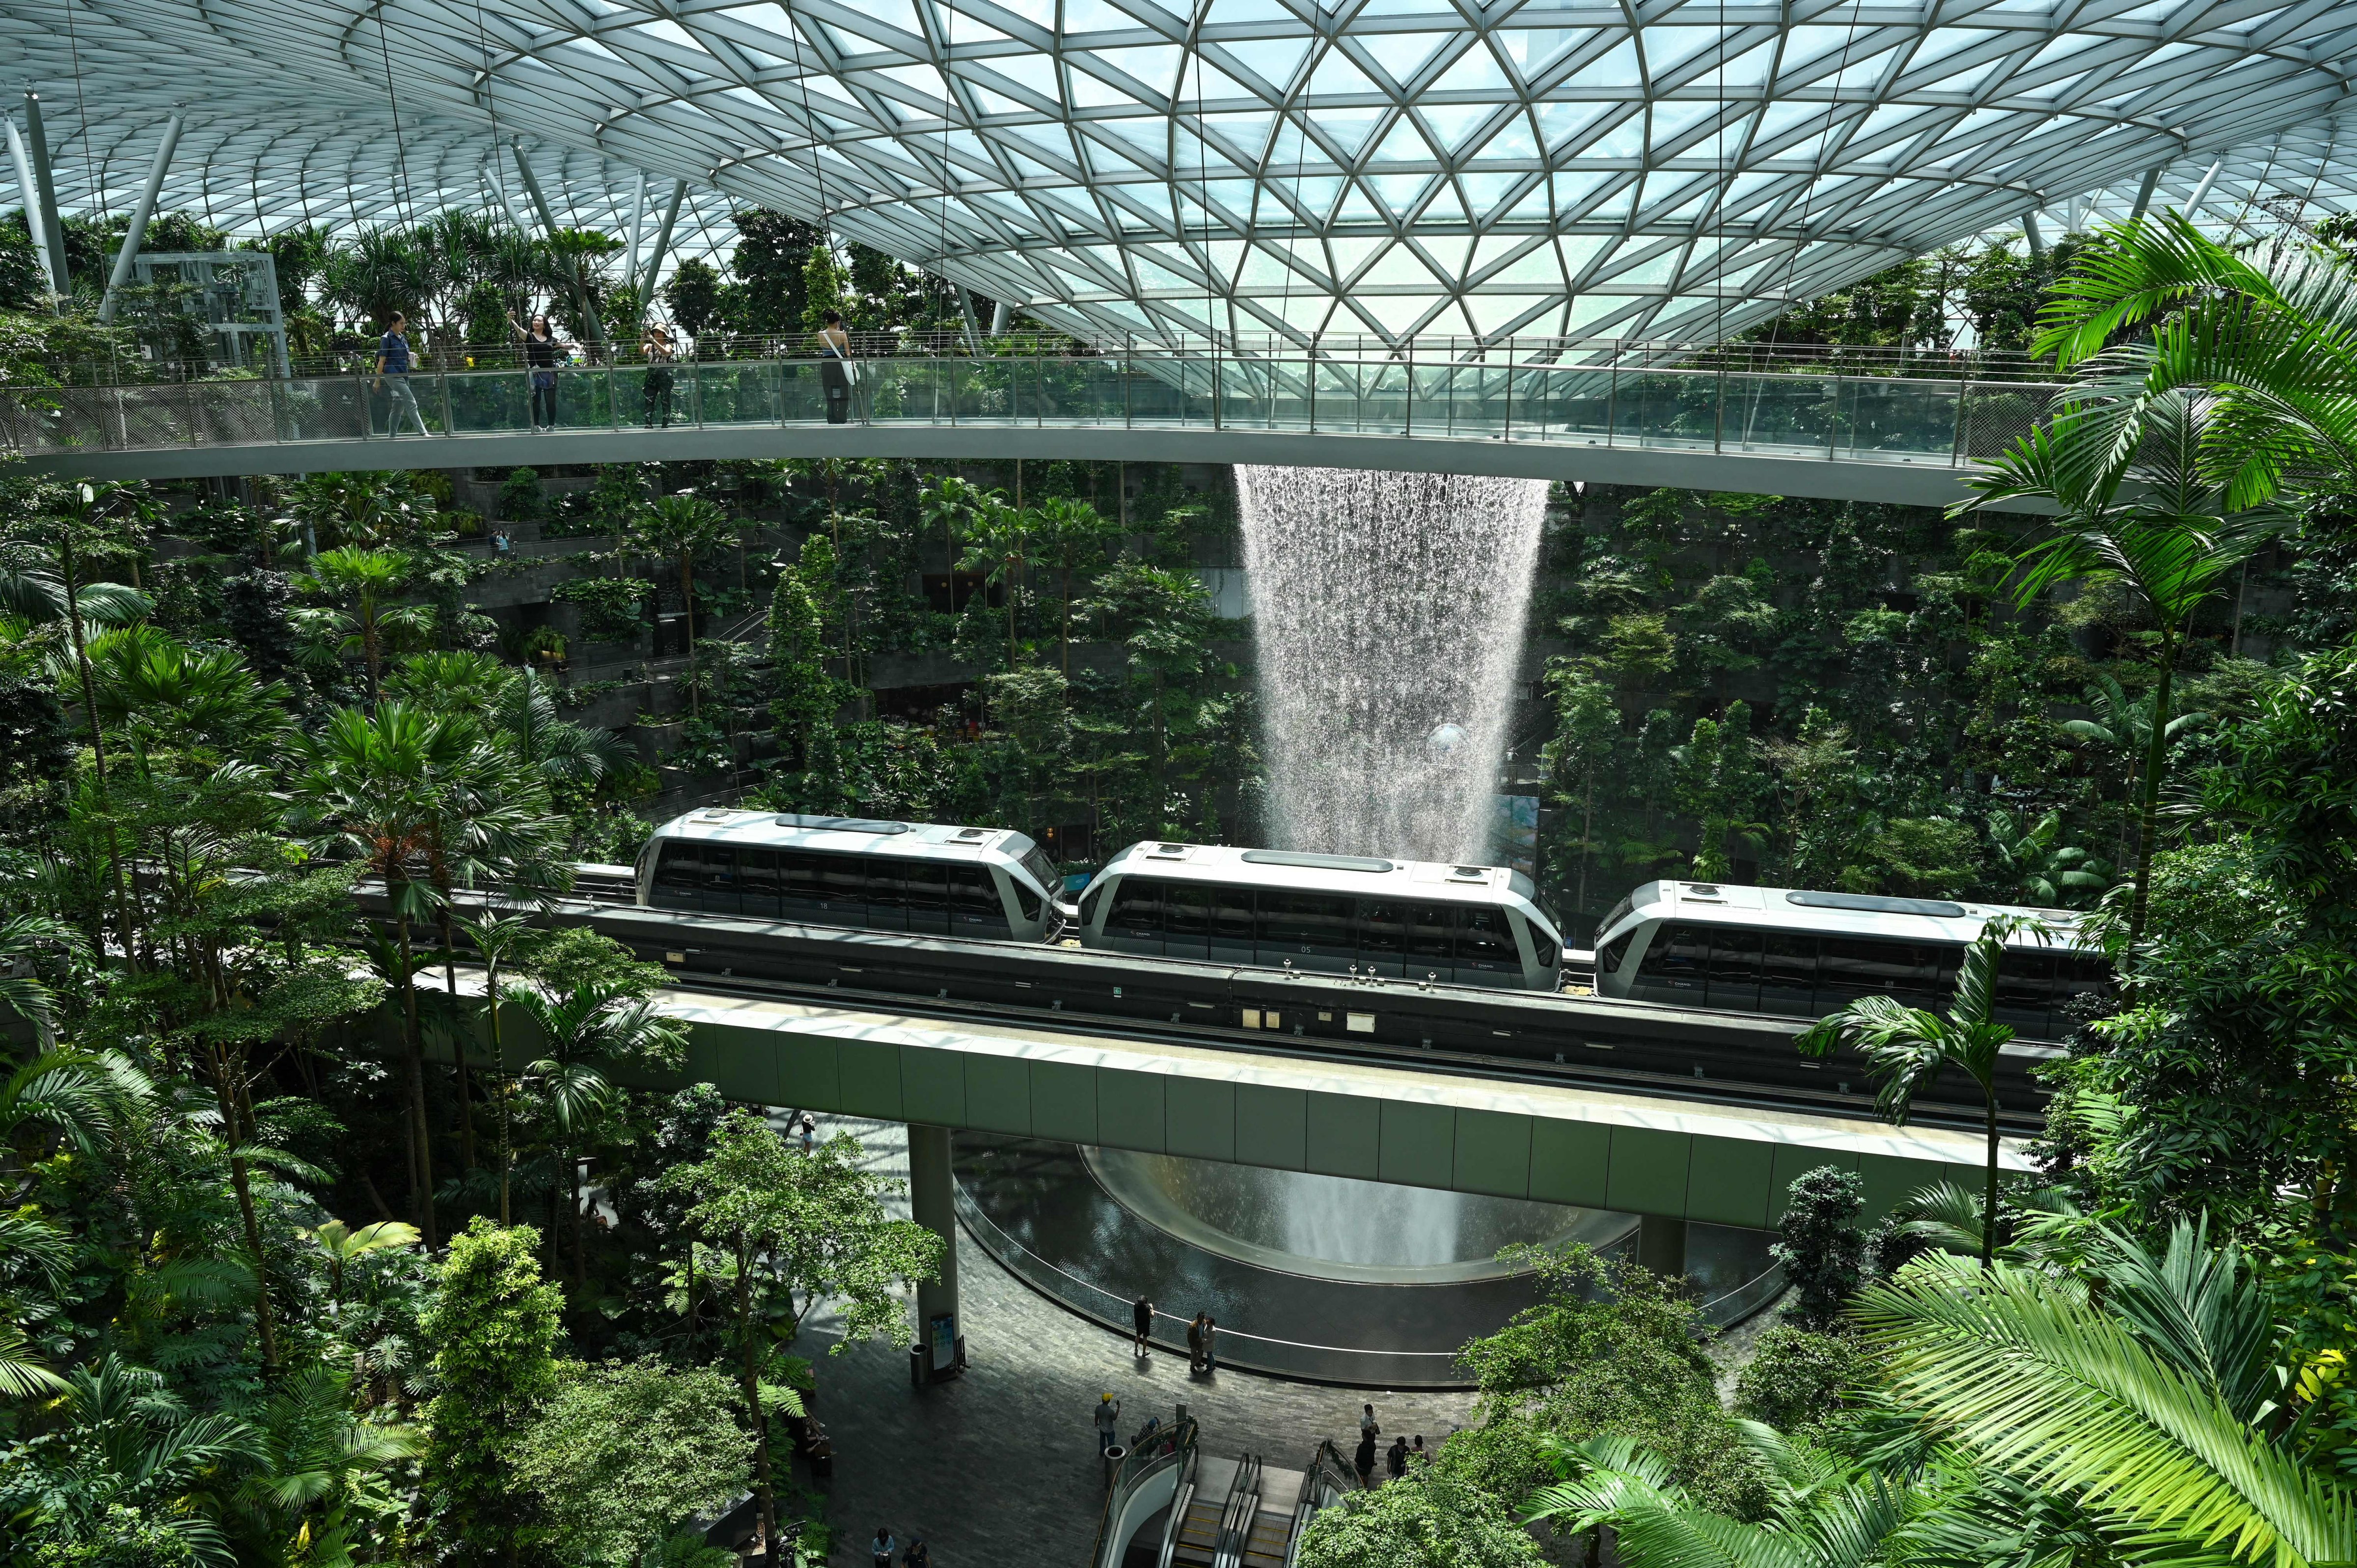 A train passes below an observation bridge of Rain Vortex, the world's tallest indoor waterfall, at Jewel, a nature-themed entertainment and retail complex at Changi Airport in Singapore, on Dec. 7, 2022. (Roslan Rahman—AFP/Getty Images)